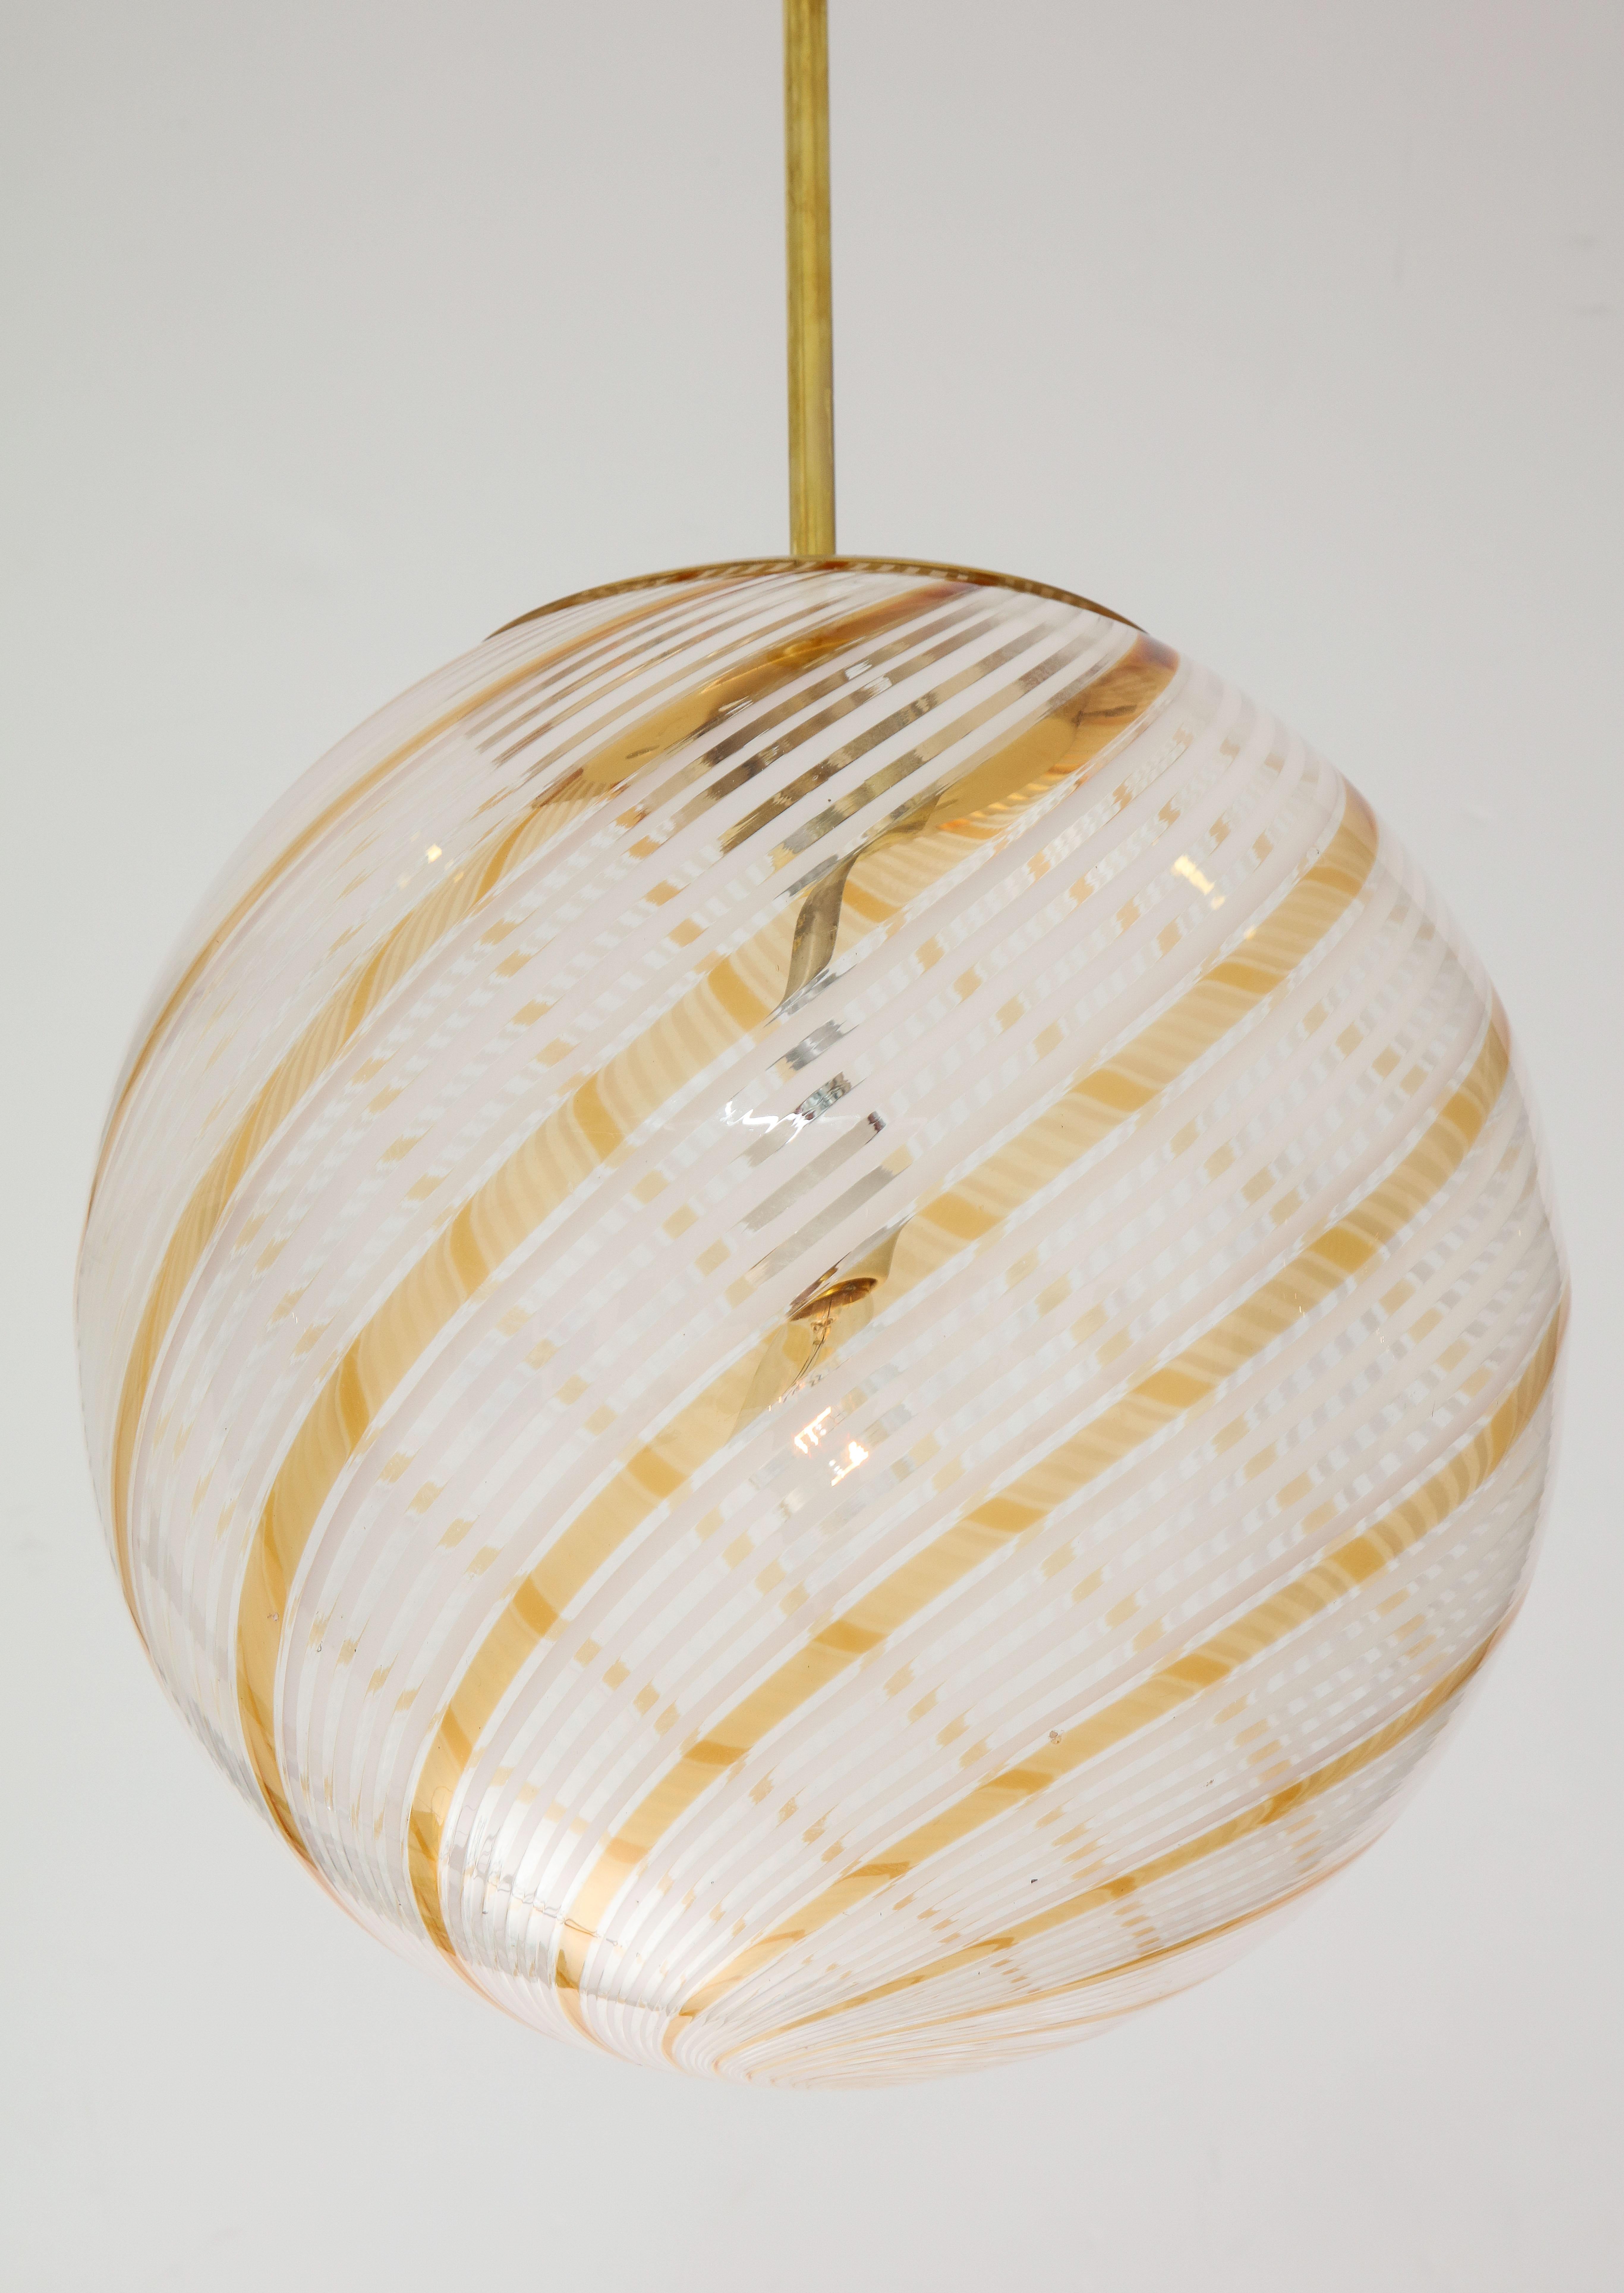 An Italian mid century handblown Murano chandelier or pendant designed by Lino Tagliapietra for La Murrina, Venice, circa 1970. The glass globe comprised of broad spirals of an alternating gold and white design suspended on a brass pole with